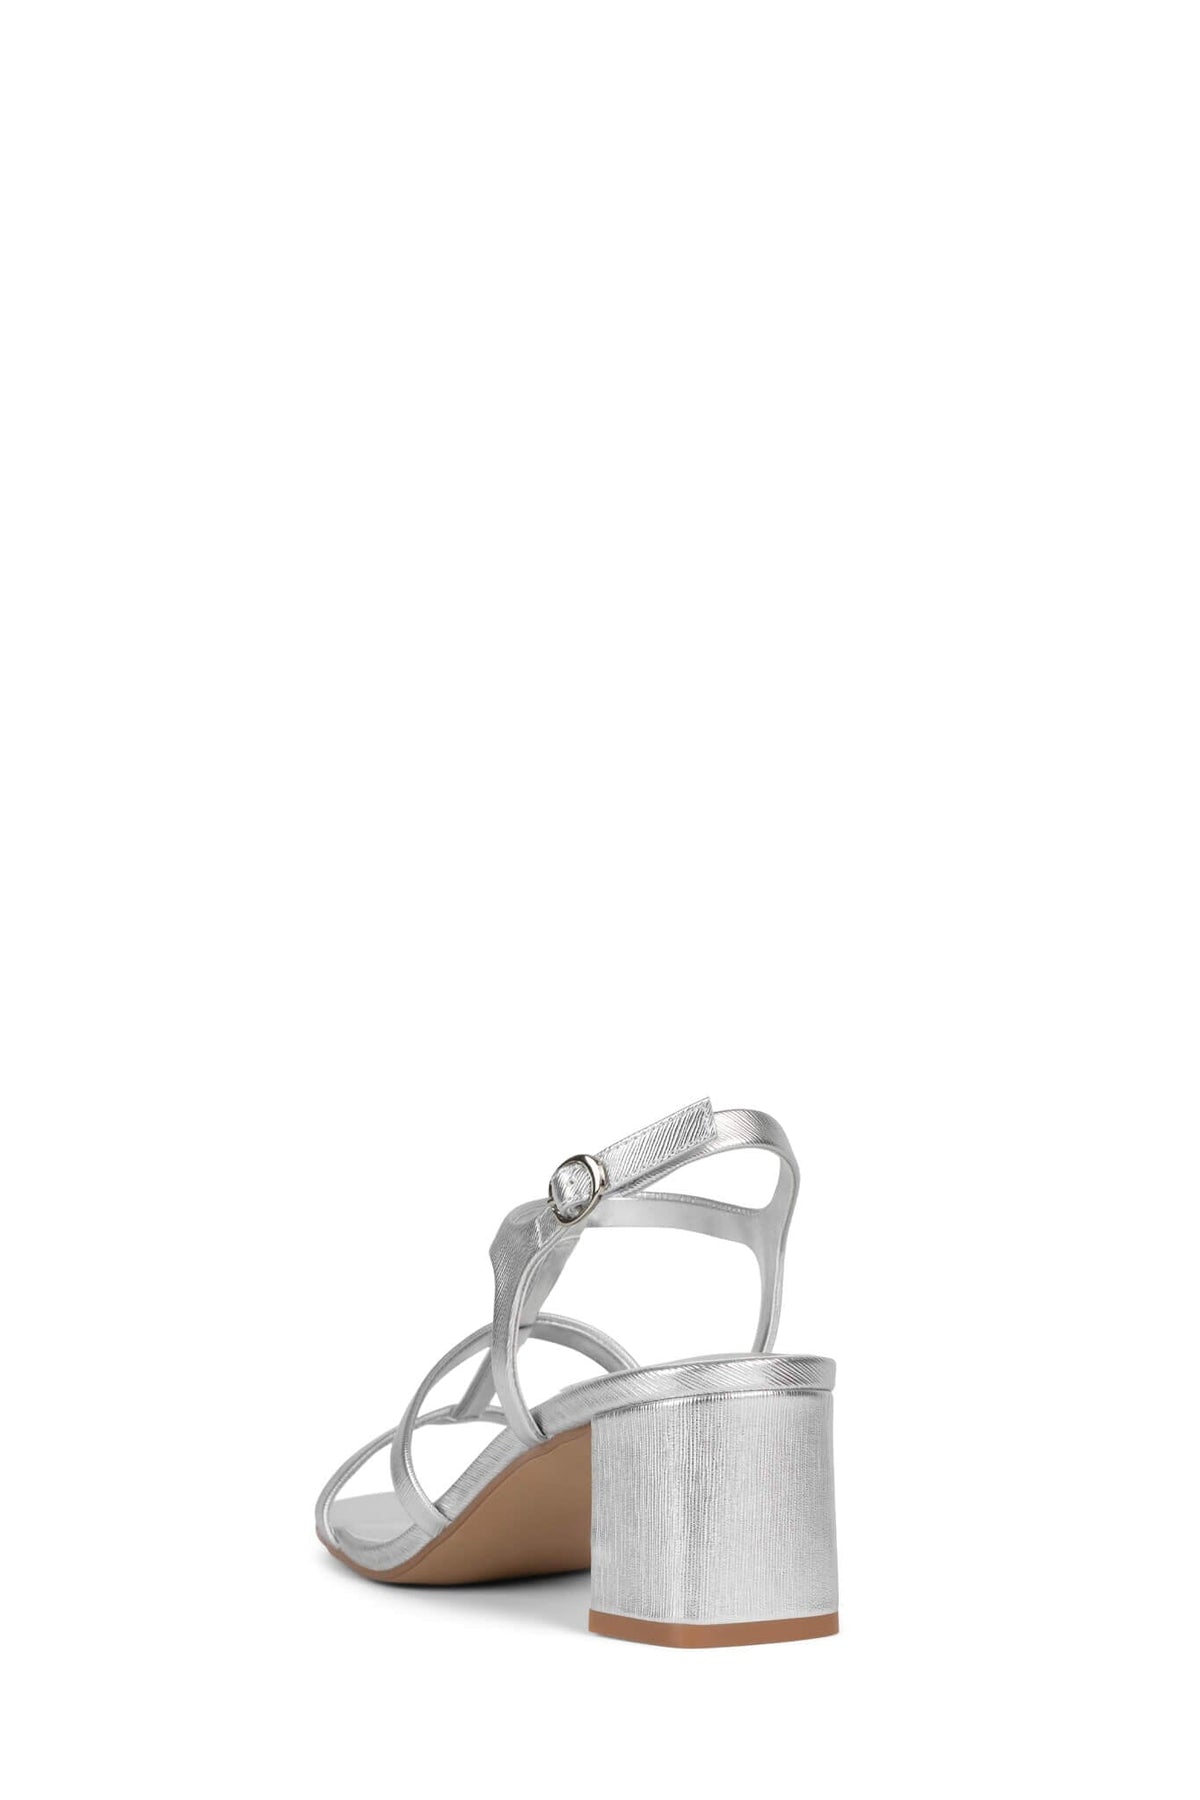 HELIOS Jeffrey Campbell Heeled Sandals Silver Lines